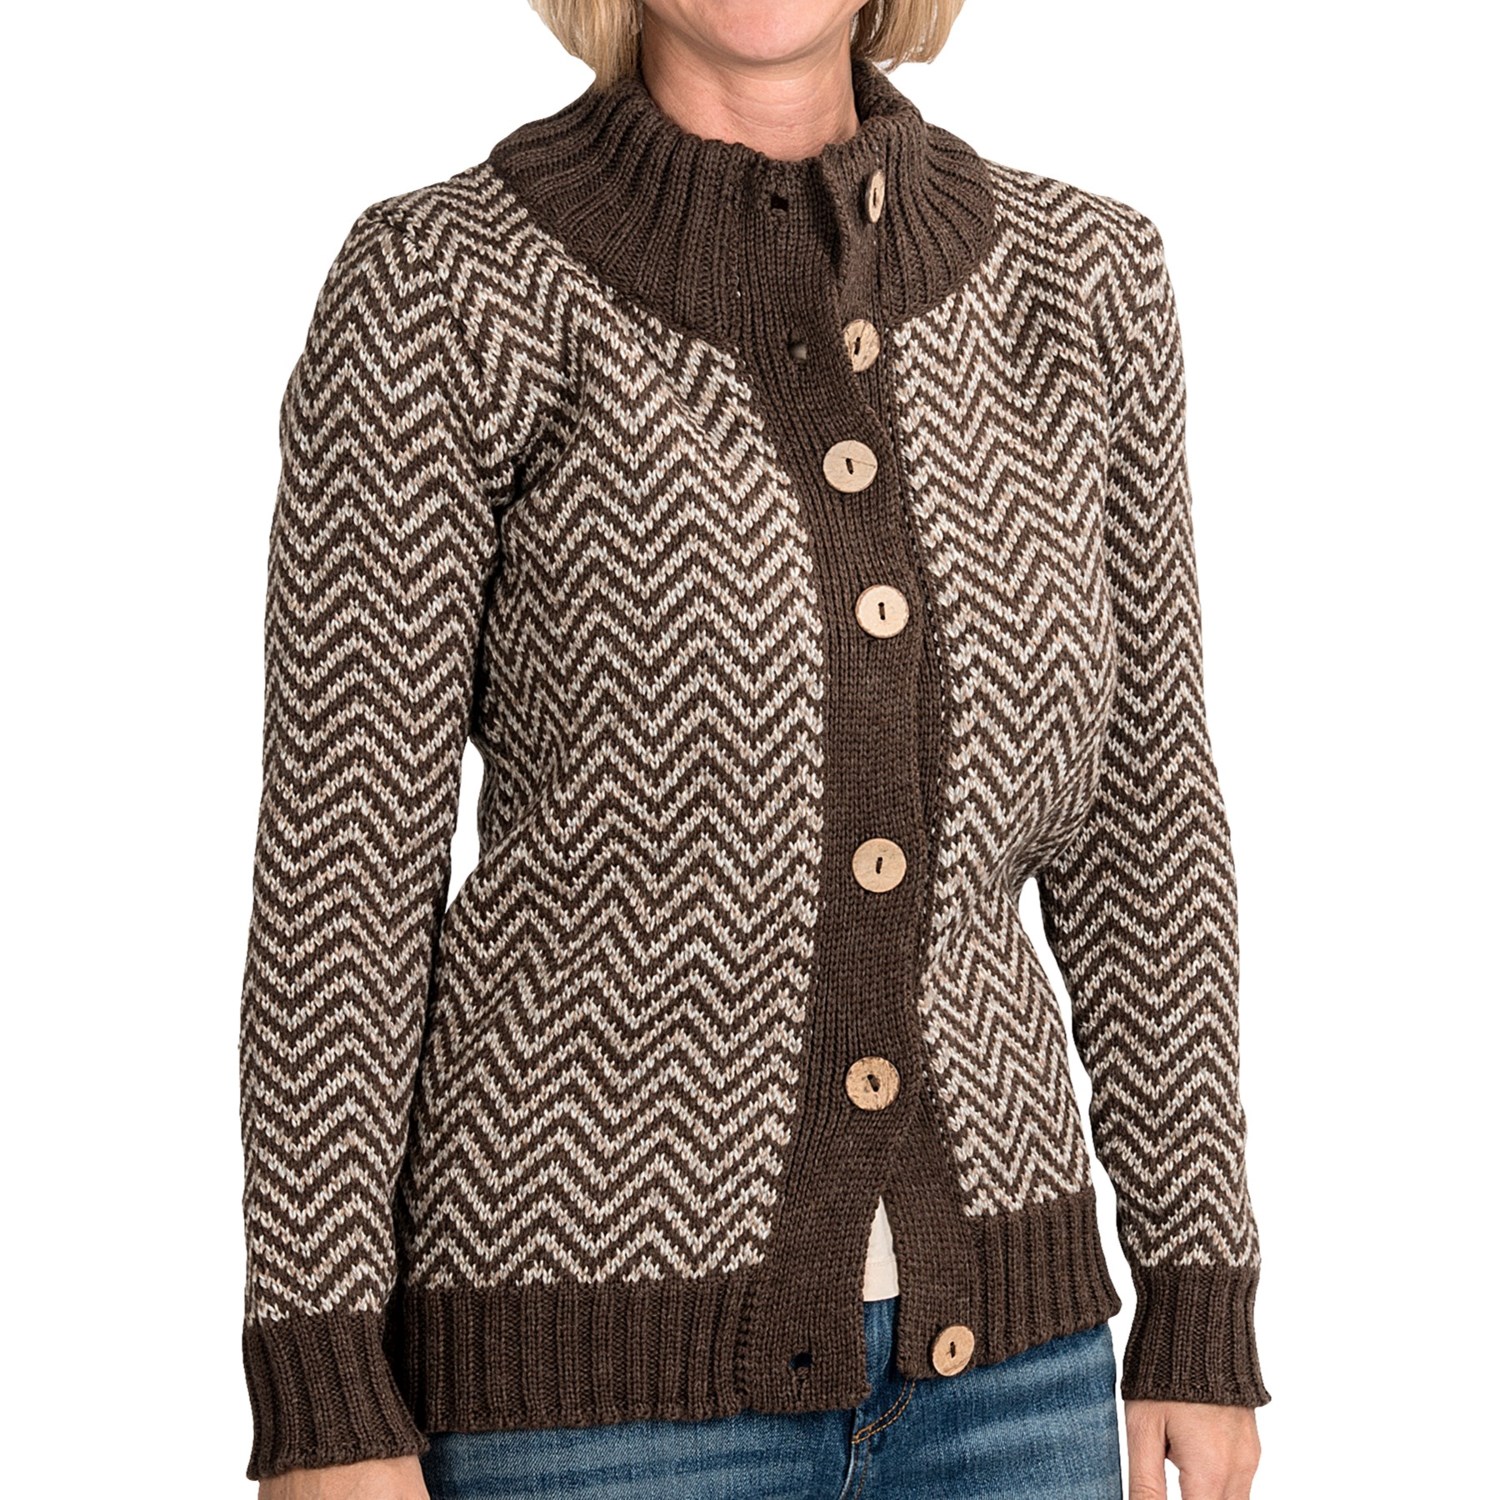 Peregrine by J.G. Glover Chevron Cardigan Sweater (For Women) 73